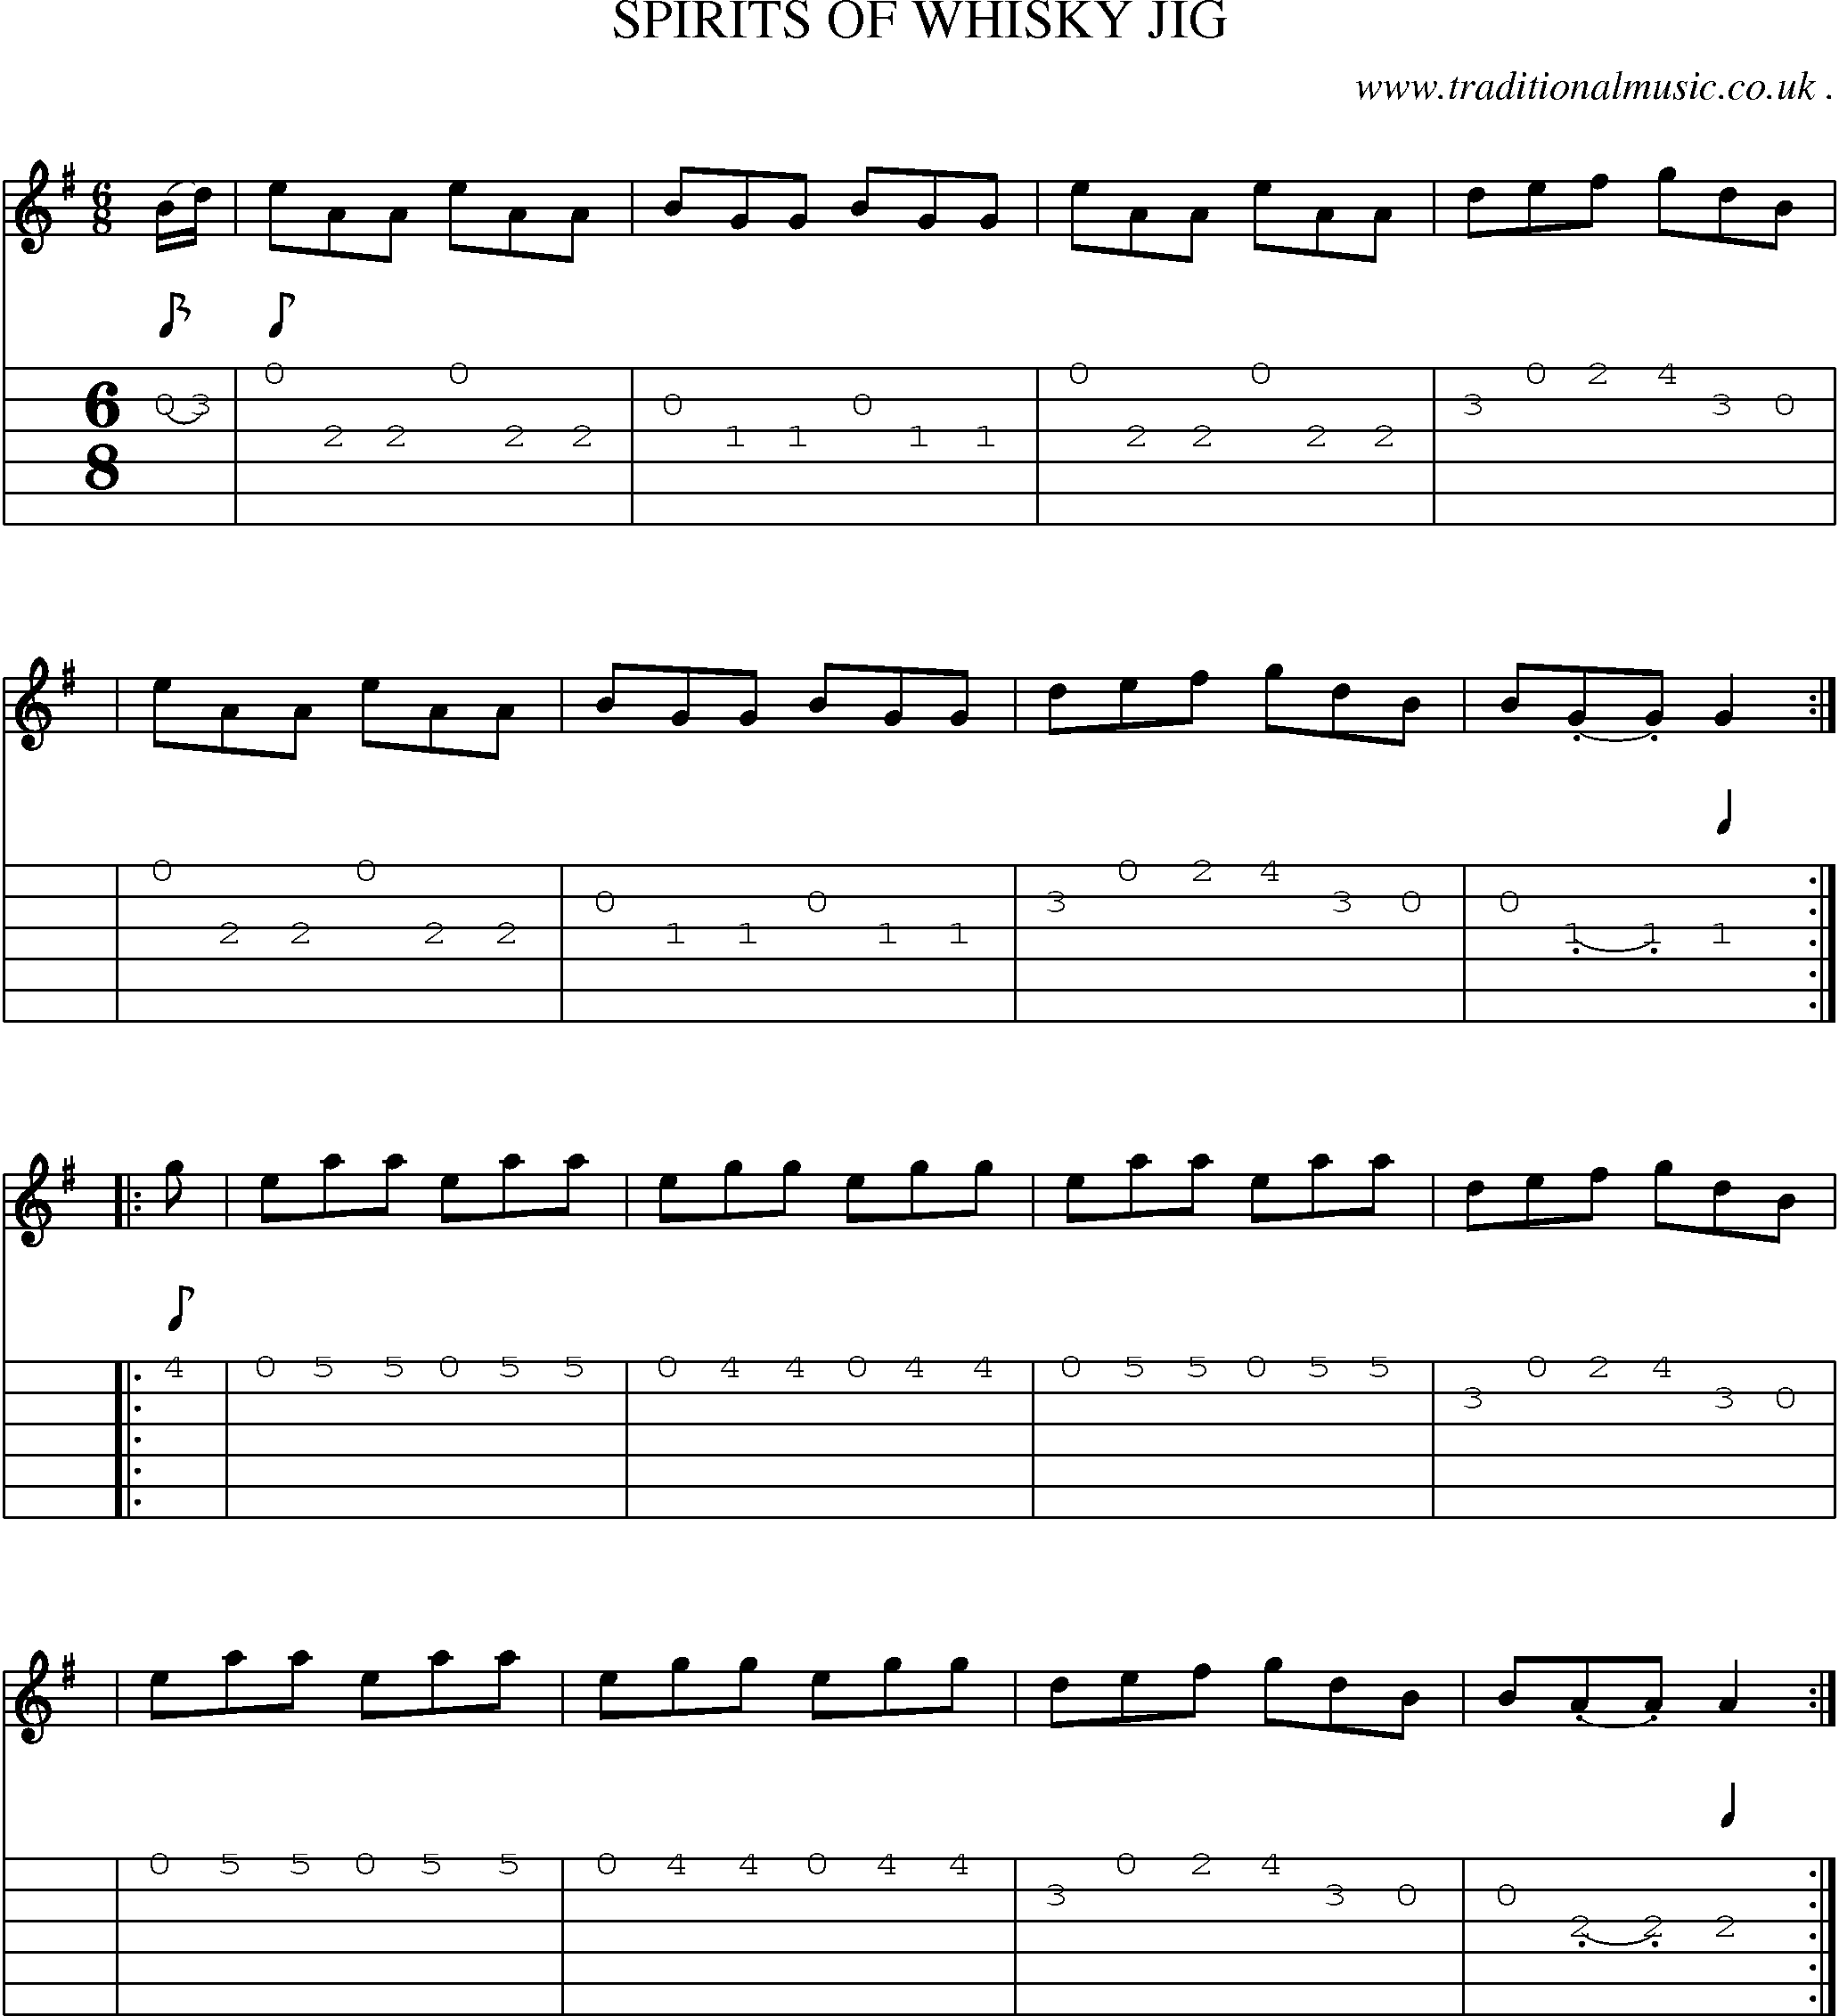 Sheet-Music and Guitar Tabs for Spirits Of Whisky Jig